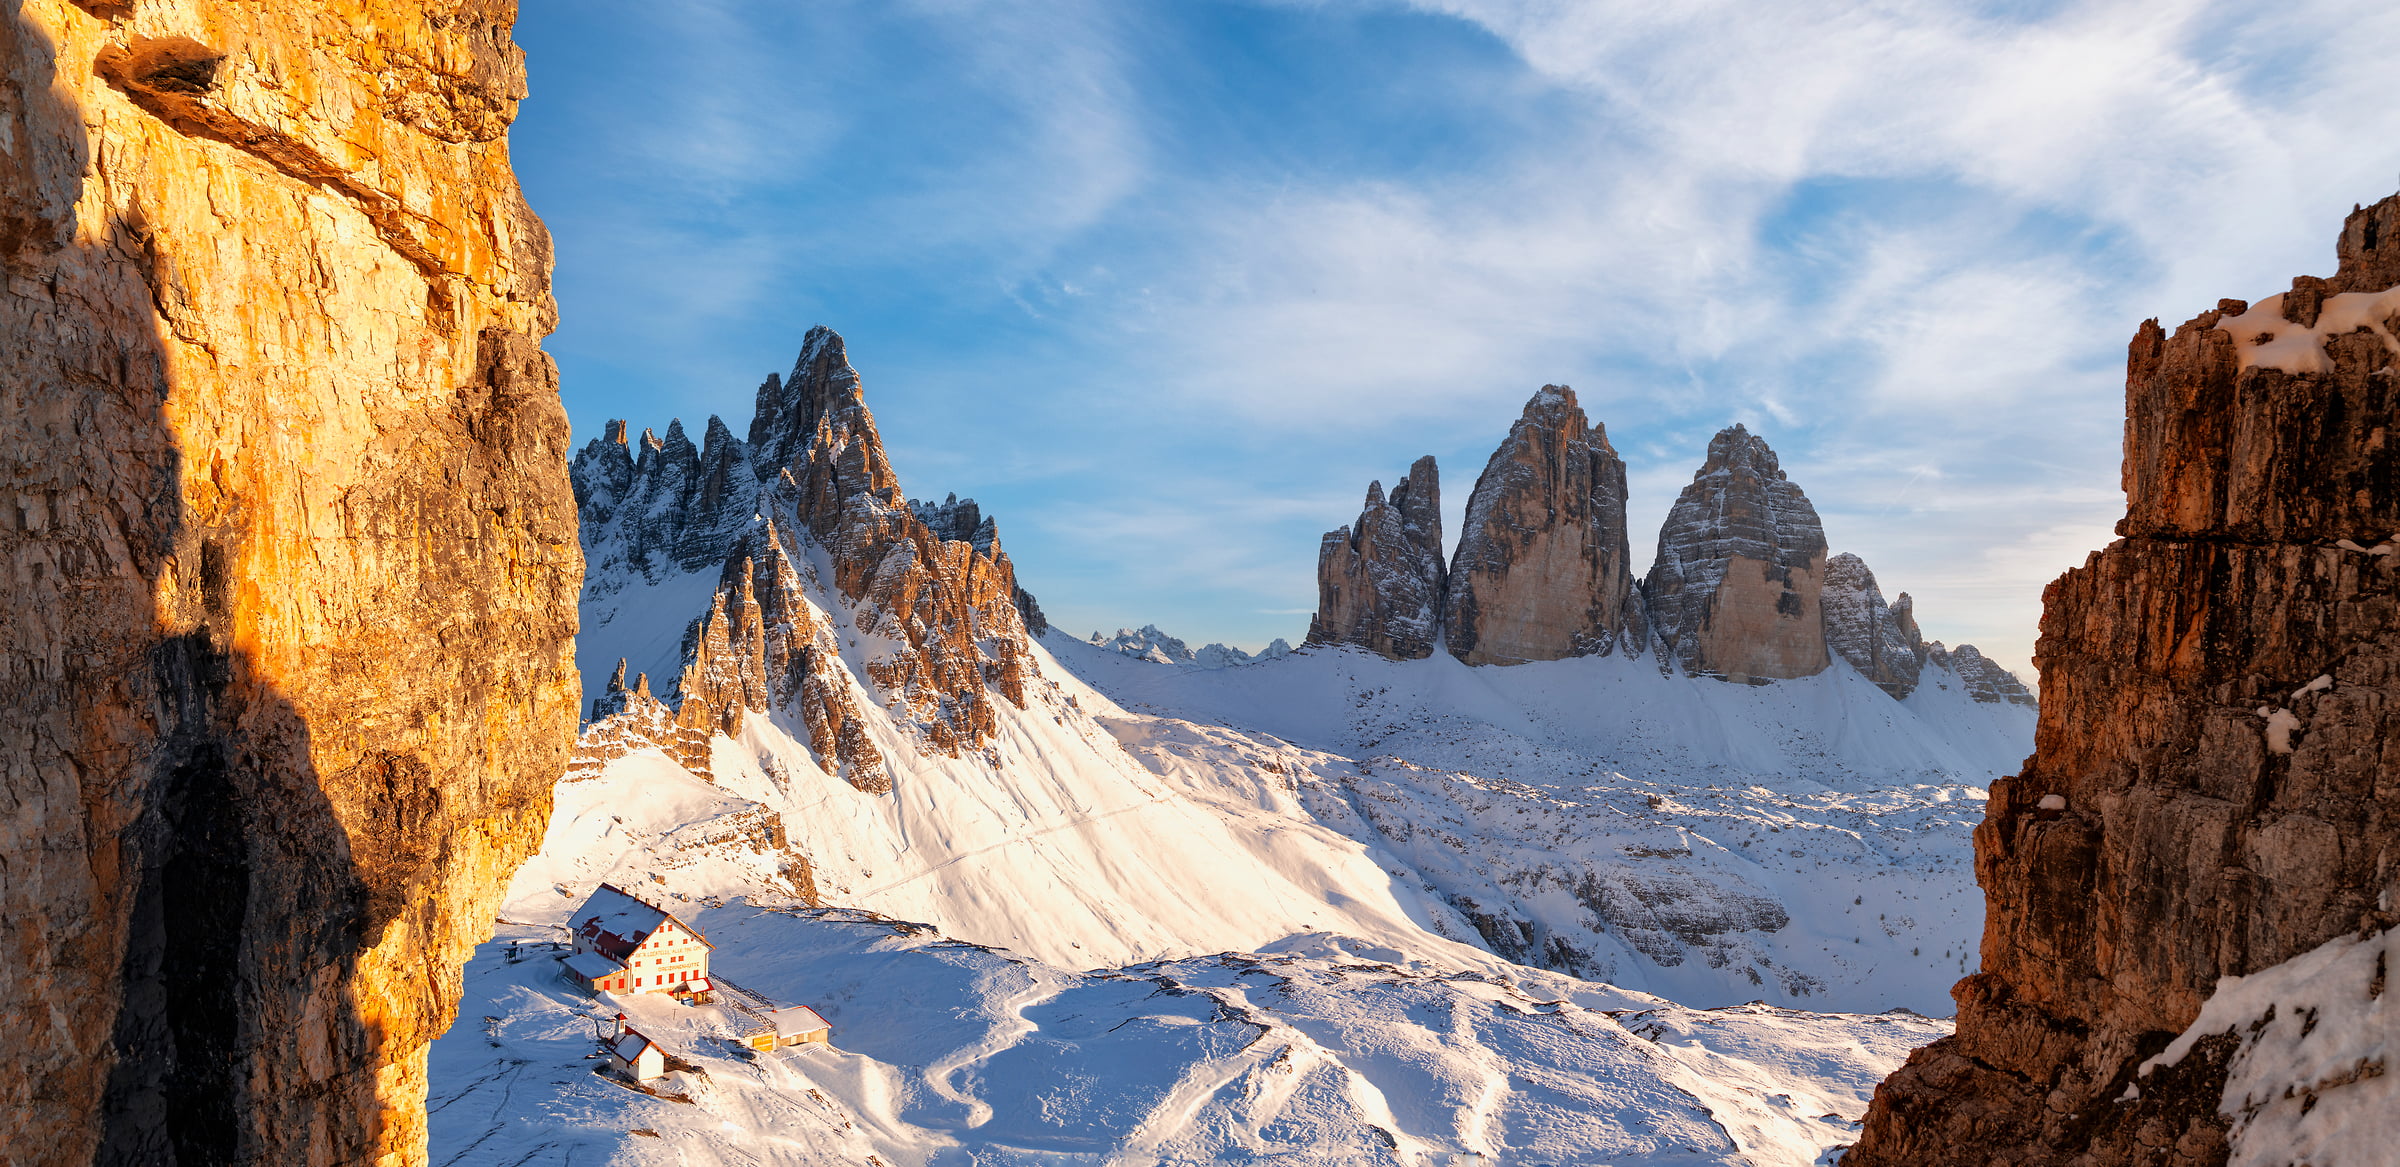 124 megapixels! A very high resolution, large-format VAST photo print of the Dolomites; landscape photograph created by Roberto Moiola in Drei Zinnen, Dolomites Unesco, Italy